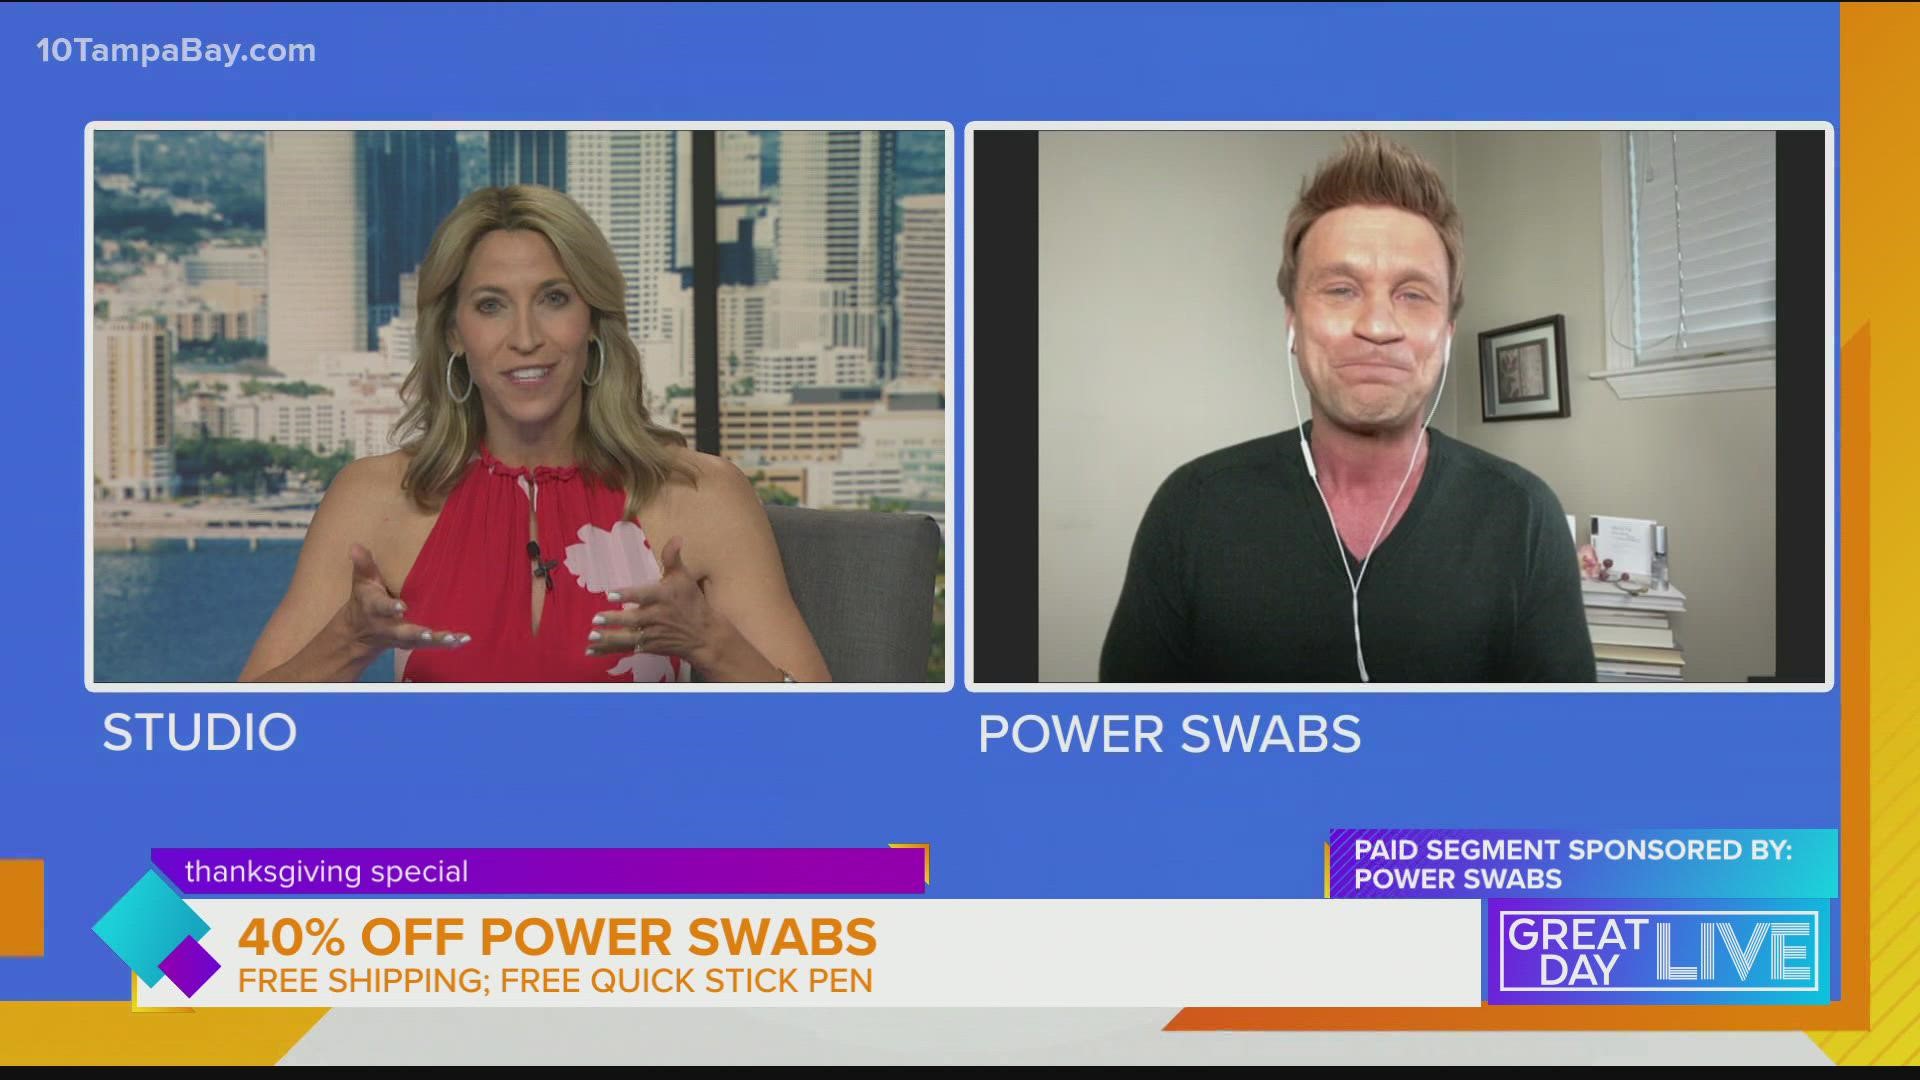 Paid segment sponsored by Power Swabs